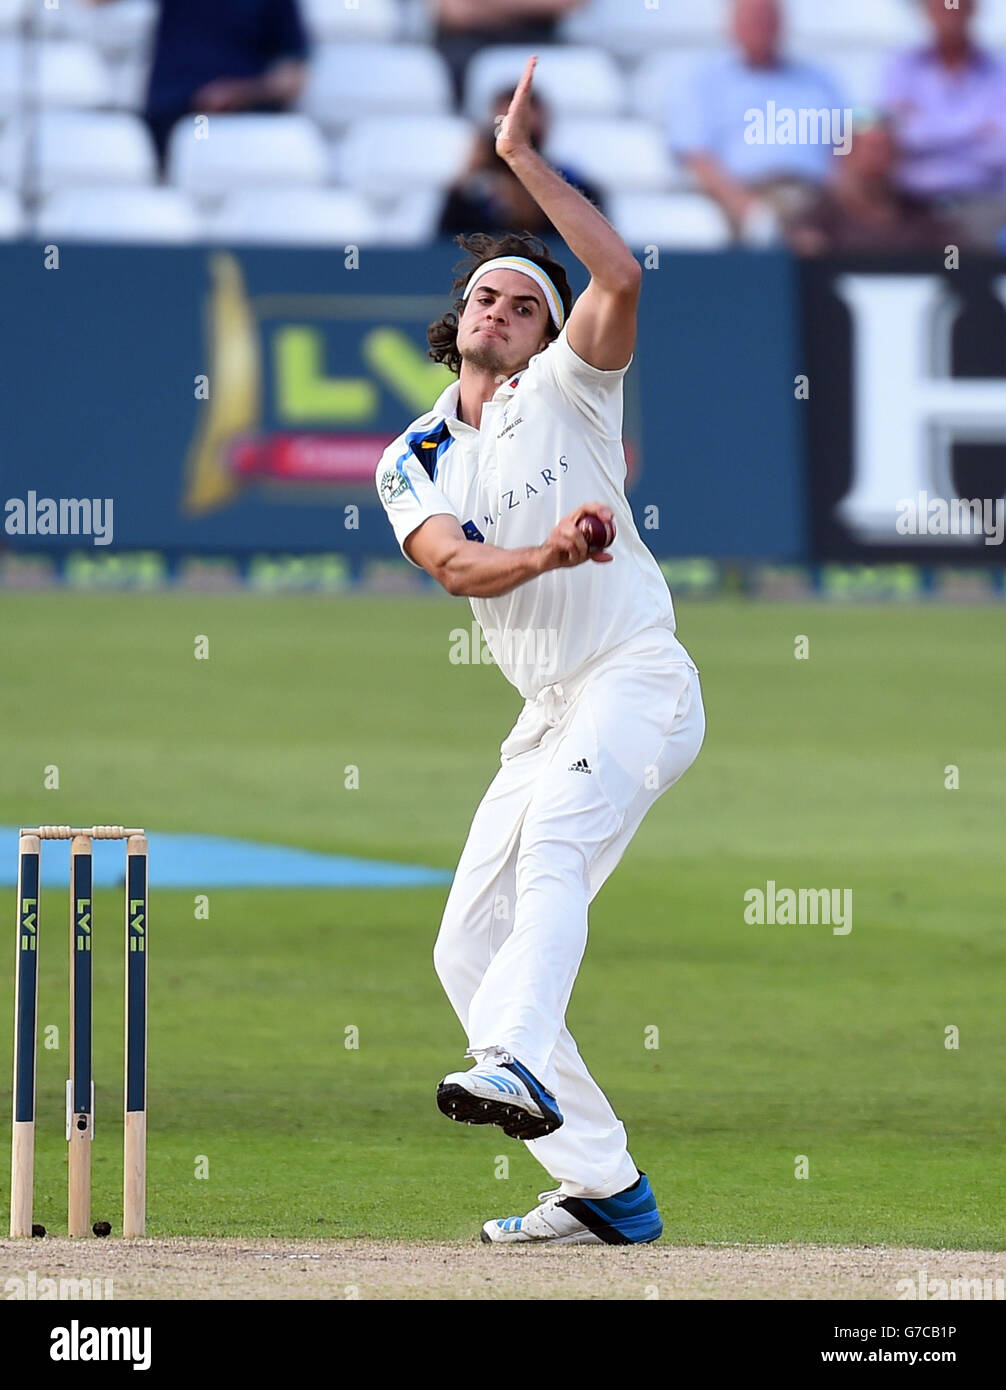 Yorkshire's Jack Brooks bowls during day two of the LV= County Championship Division One match at Trent Bridge, Nottingham. Picture date: Wednesday September 10, 2014. See PA story CRICKET Nottinghamshire. Photo credit should read: Simon Cooper/PA Wire Stock Photo